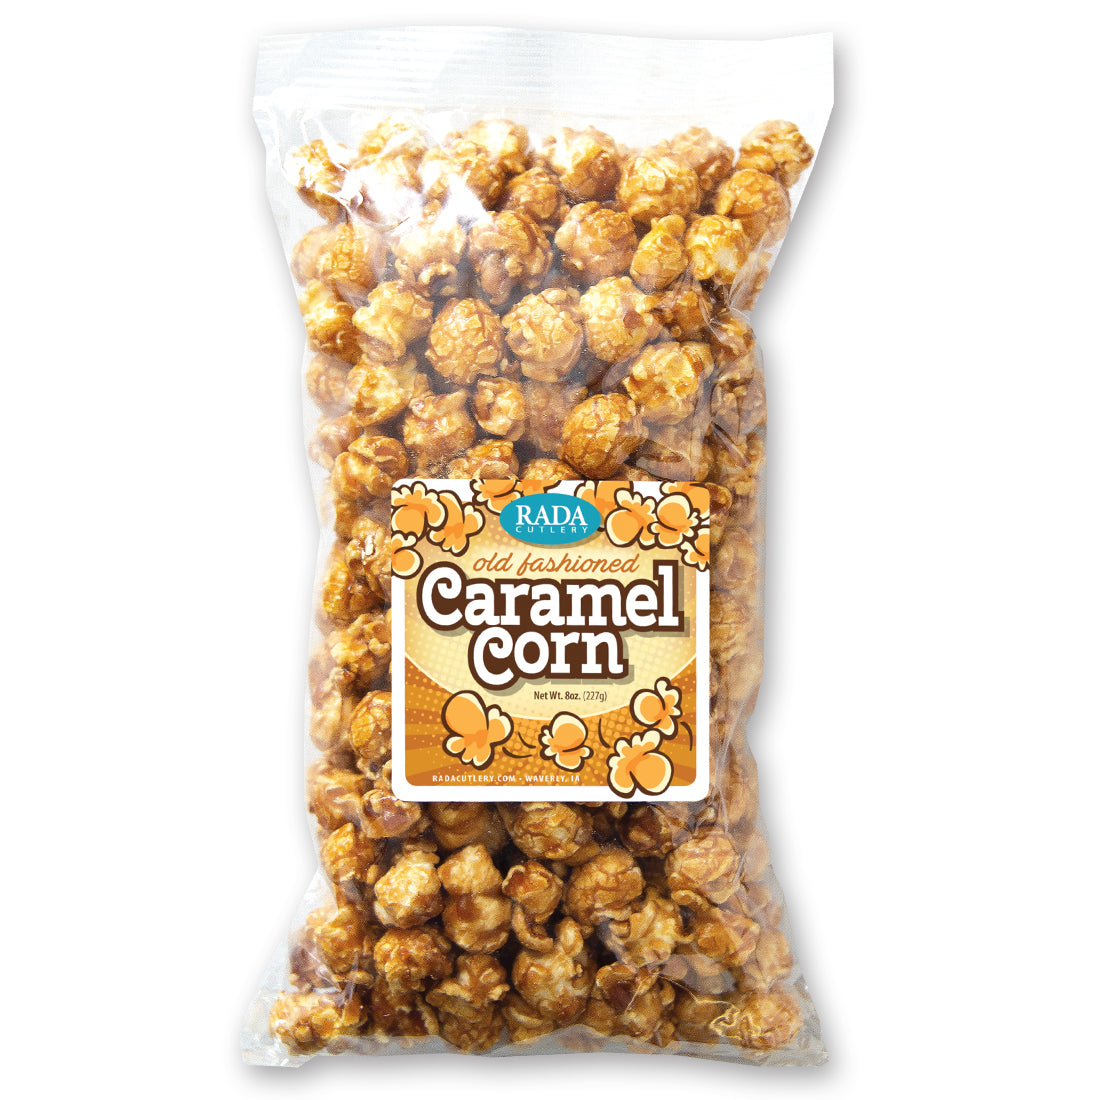 Caramel popcorn in a bowl spread out with a popcorn scooper.